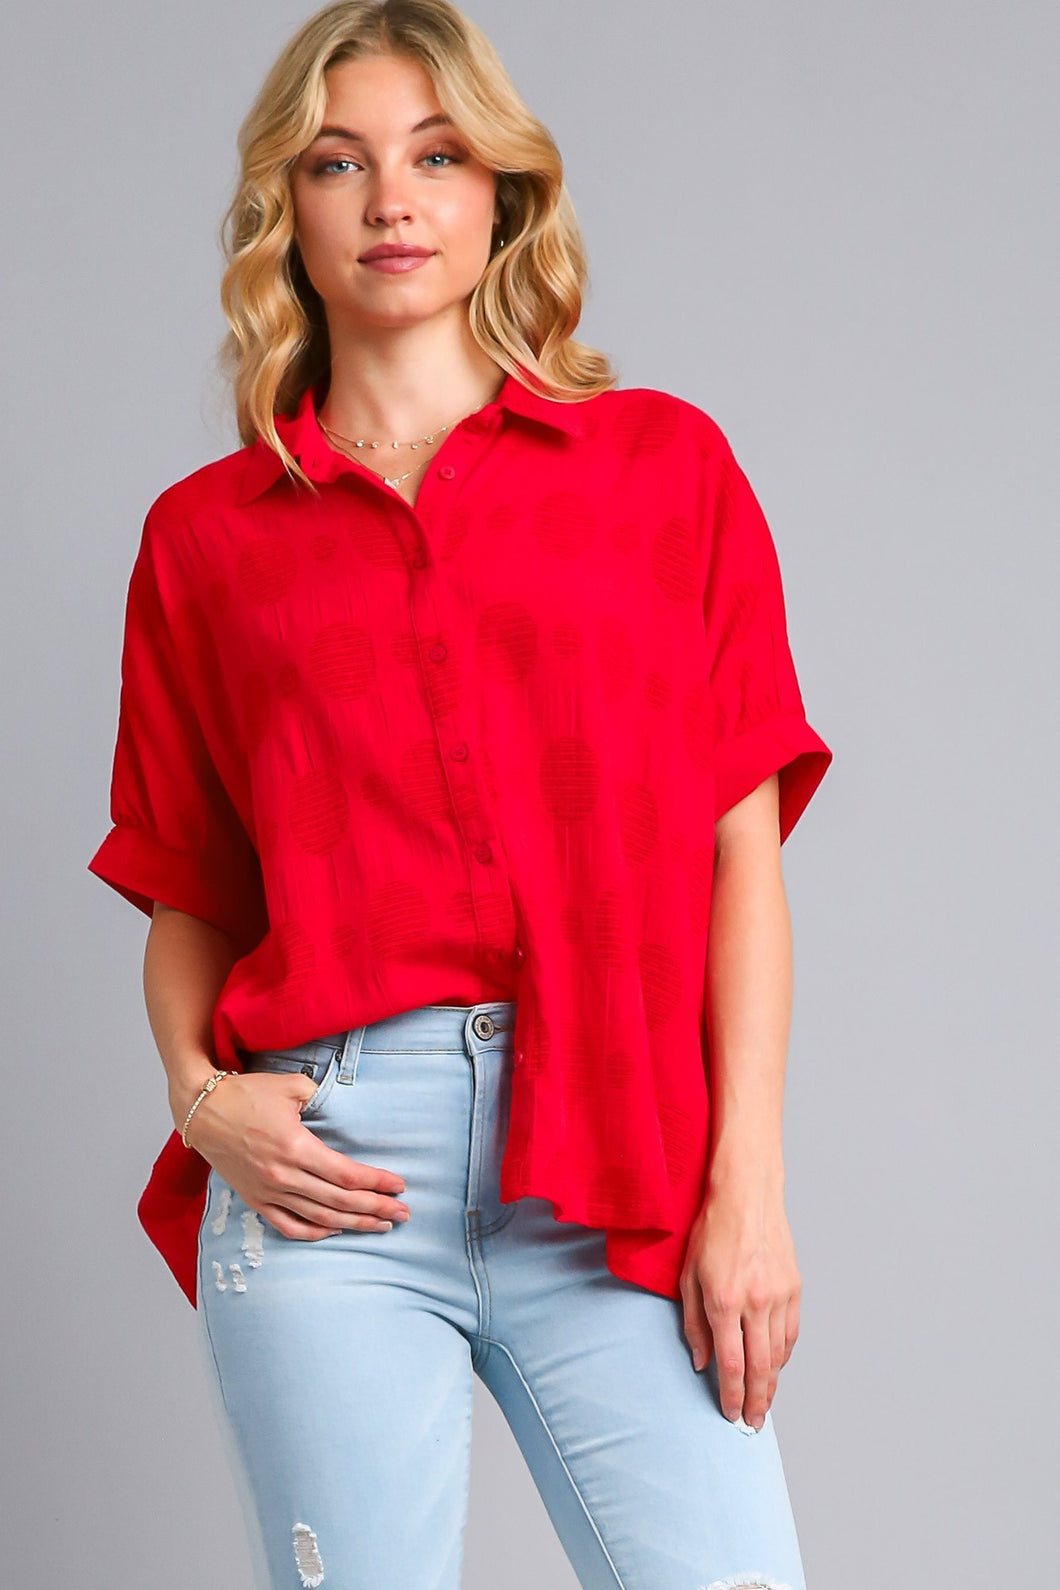 Umgee Textured Fabric Button Down Top in Red Shirts & Tops Umgee   